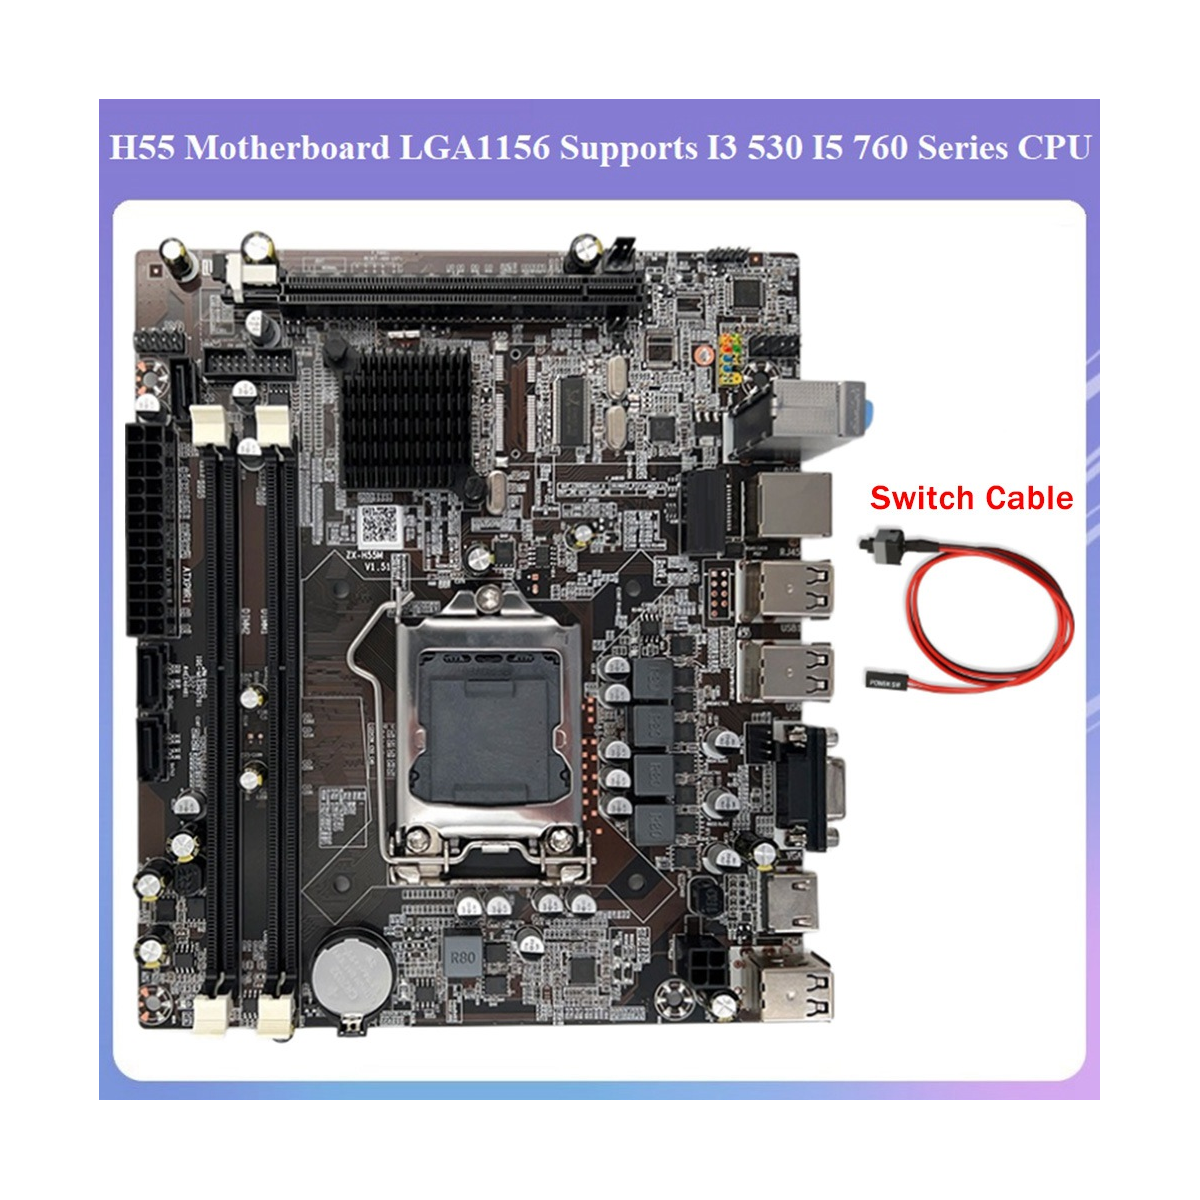 H55 Motherboard LGA1156 Supports I3 530 I5 760 Series CPU DDR3 Memory Desktop Computer Motherboard with Switch Cable - image 2 of 8